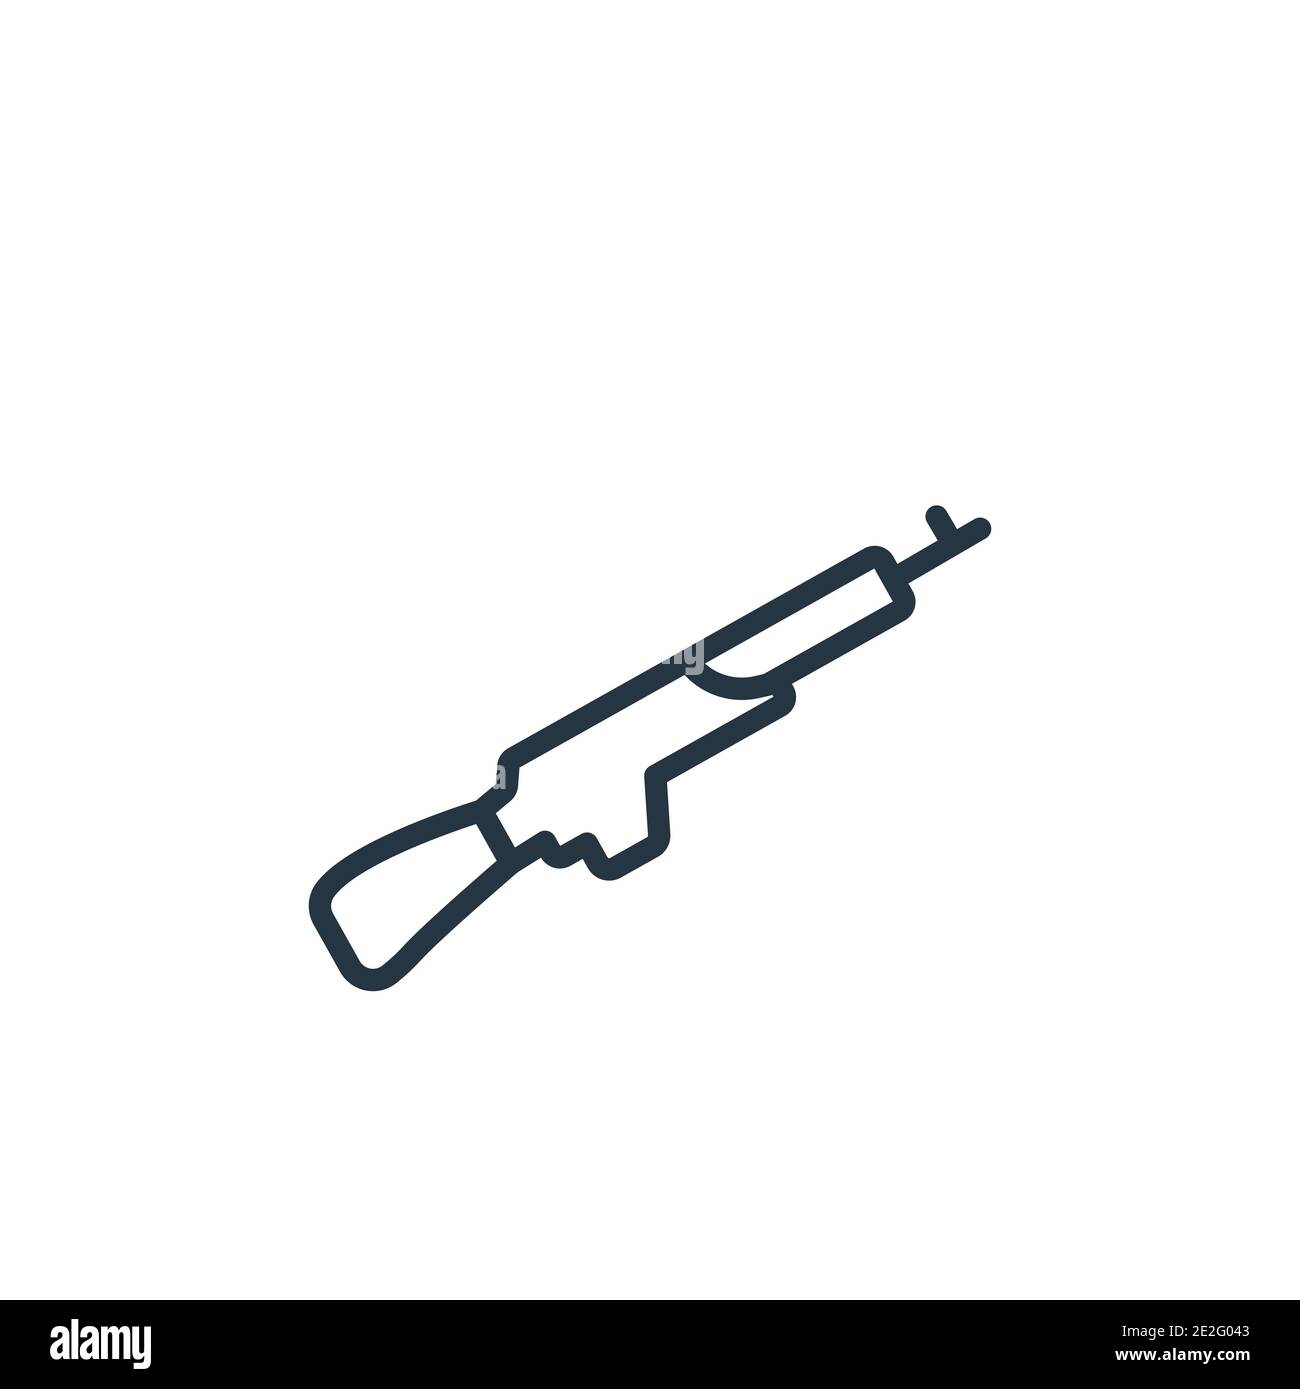 Bayonet on rifle outline vector icon. Thin line black bayonet on rifle icon, flat vector simple element illustration from editable army concept isolat Stock Vector